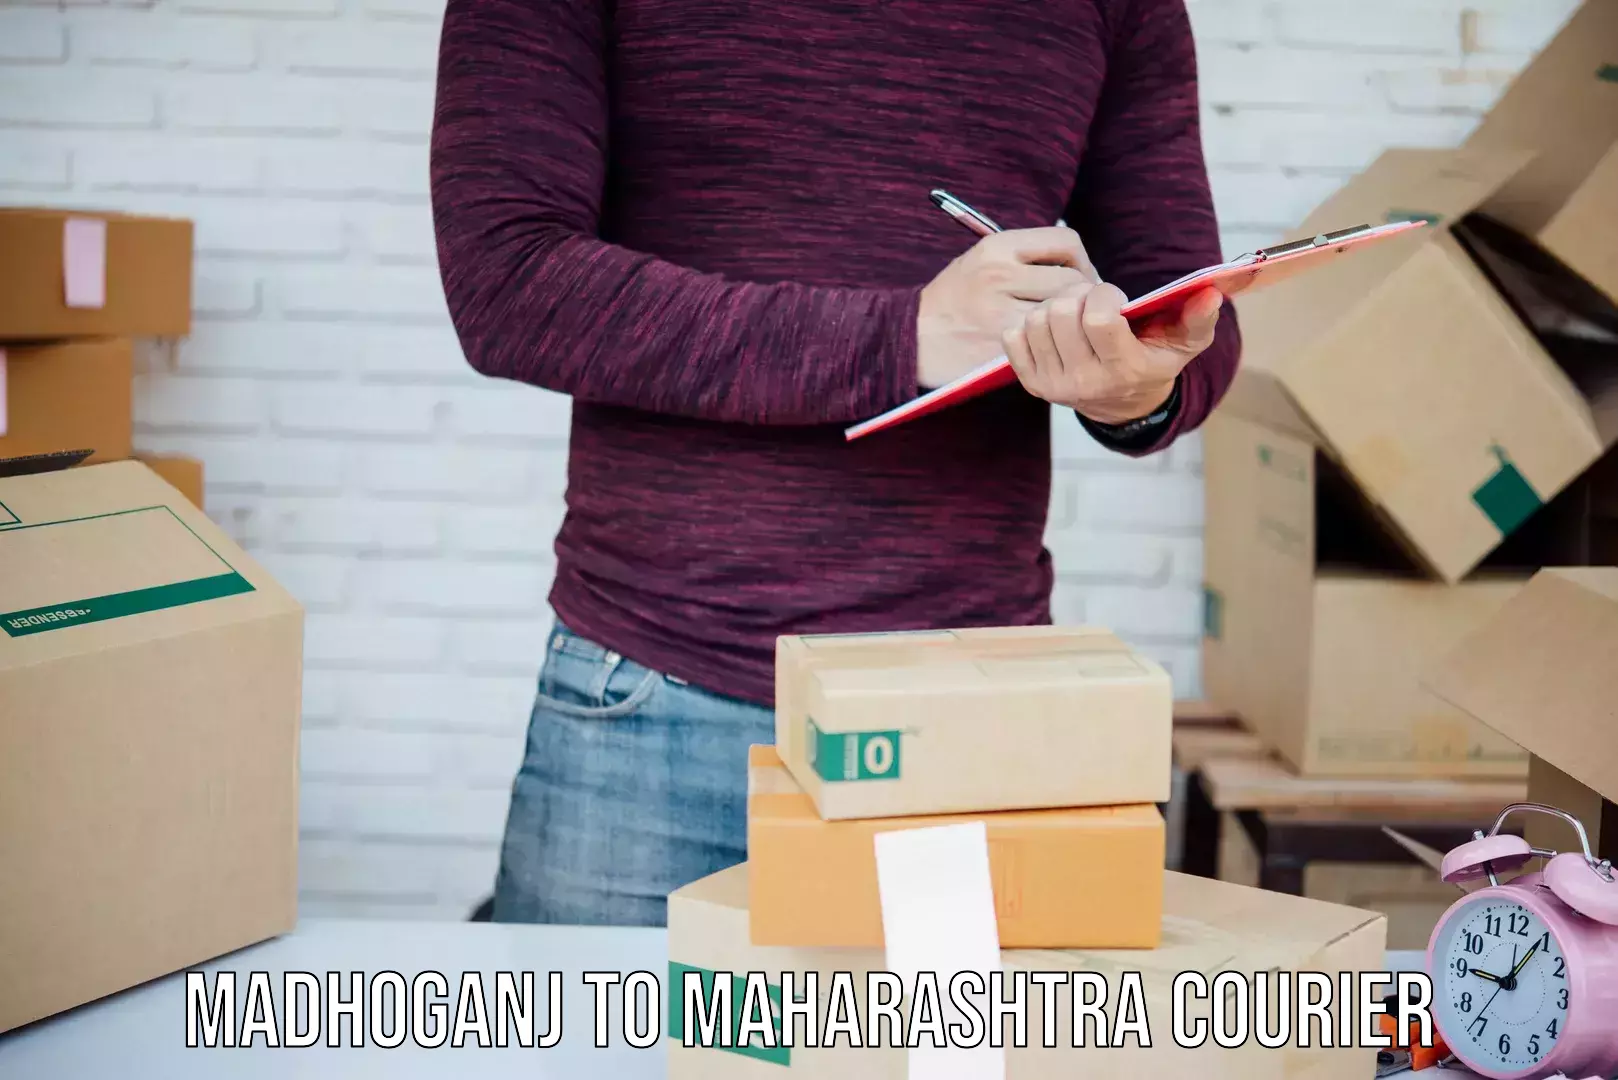 State-of-the-art courier technology Madhoganj to Pune